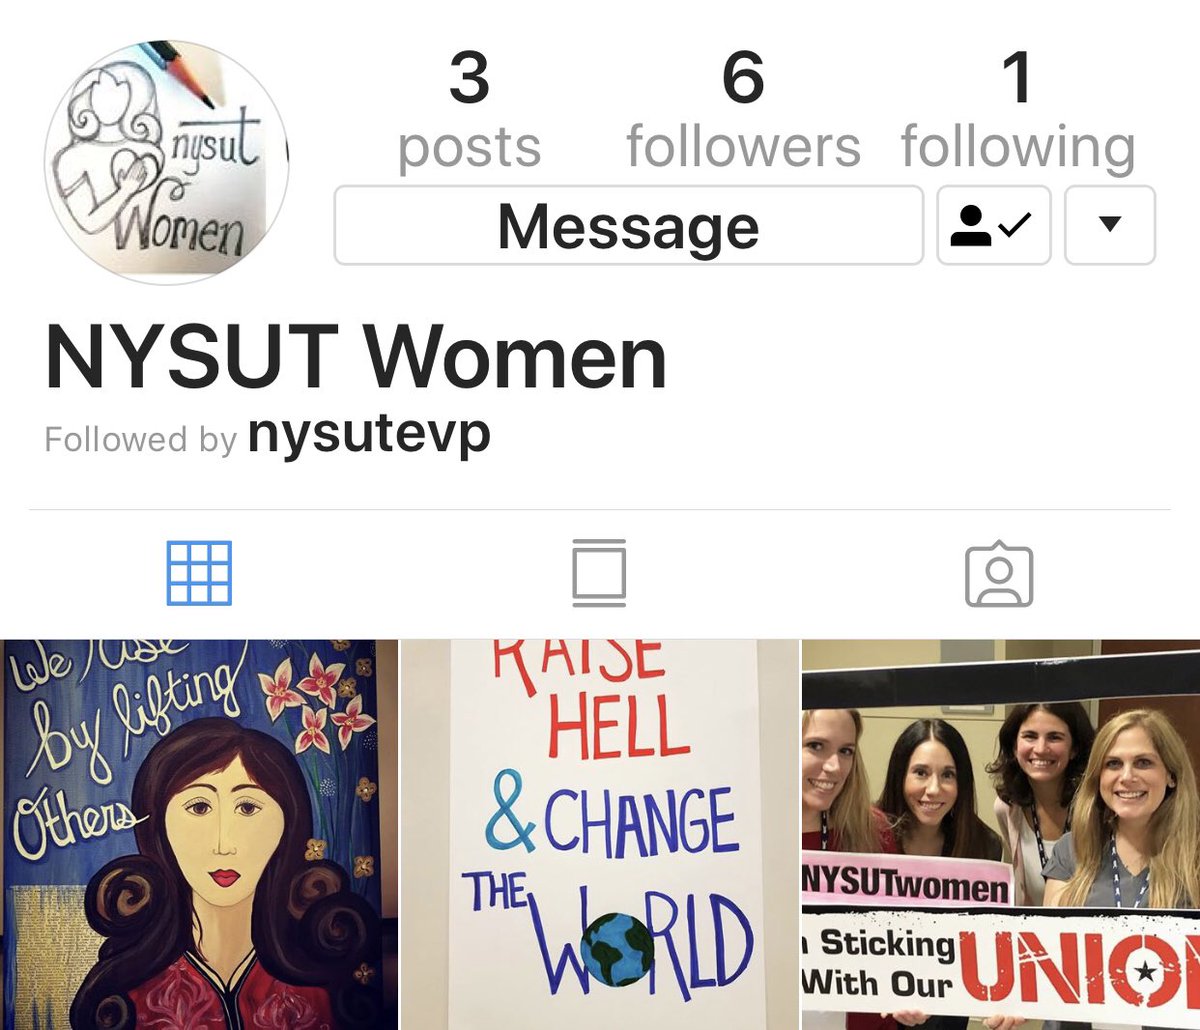 nysut - following the girl you like on instagram